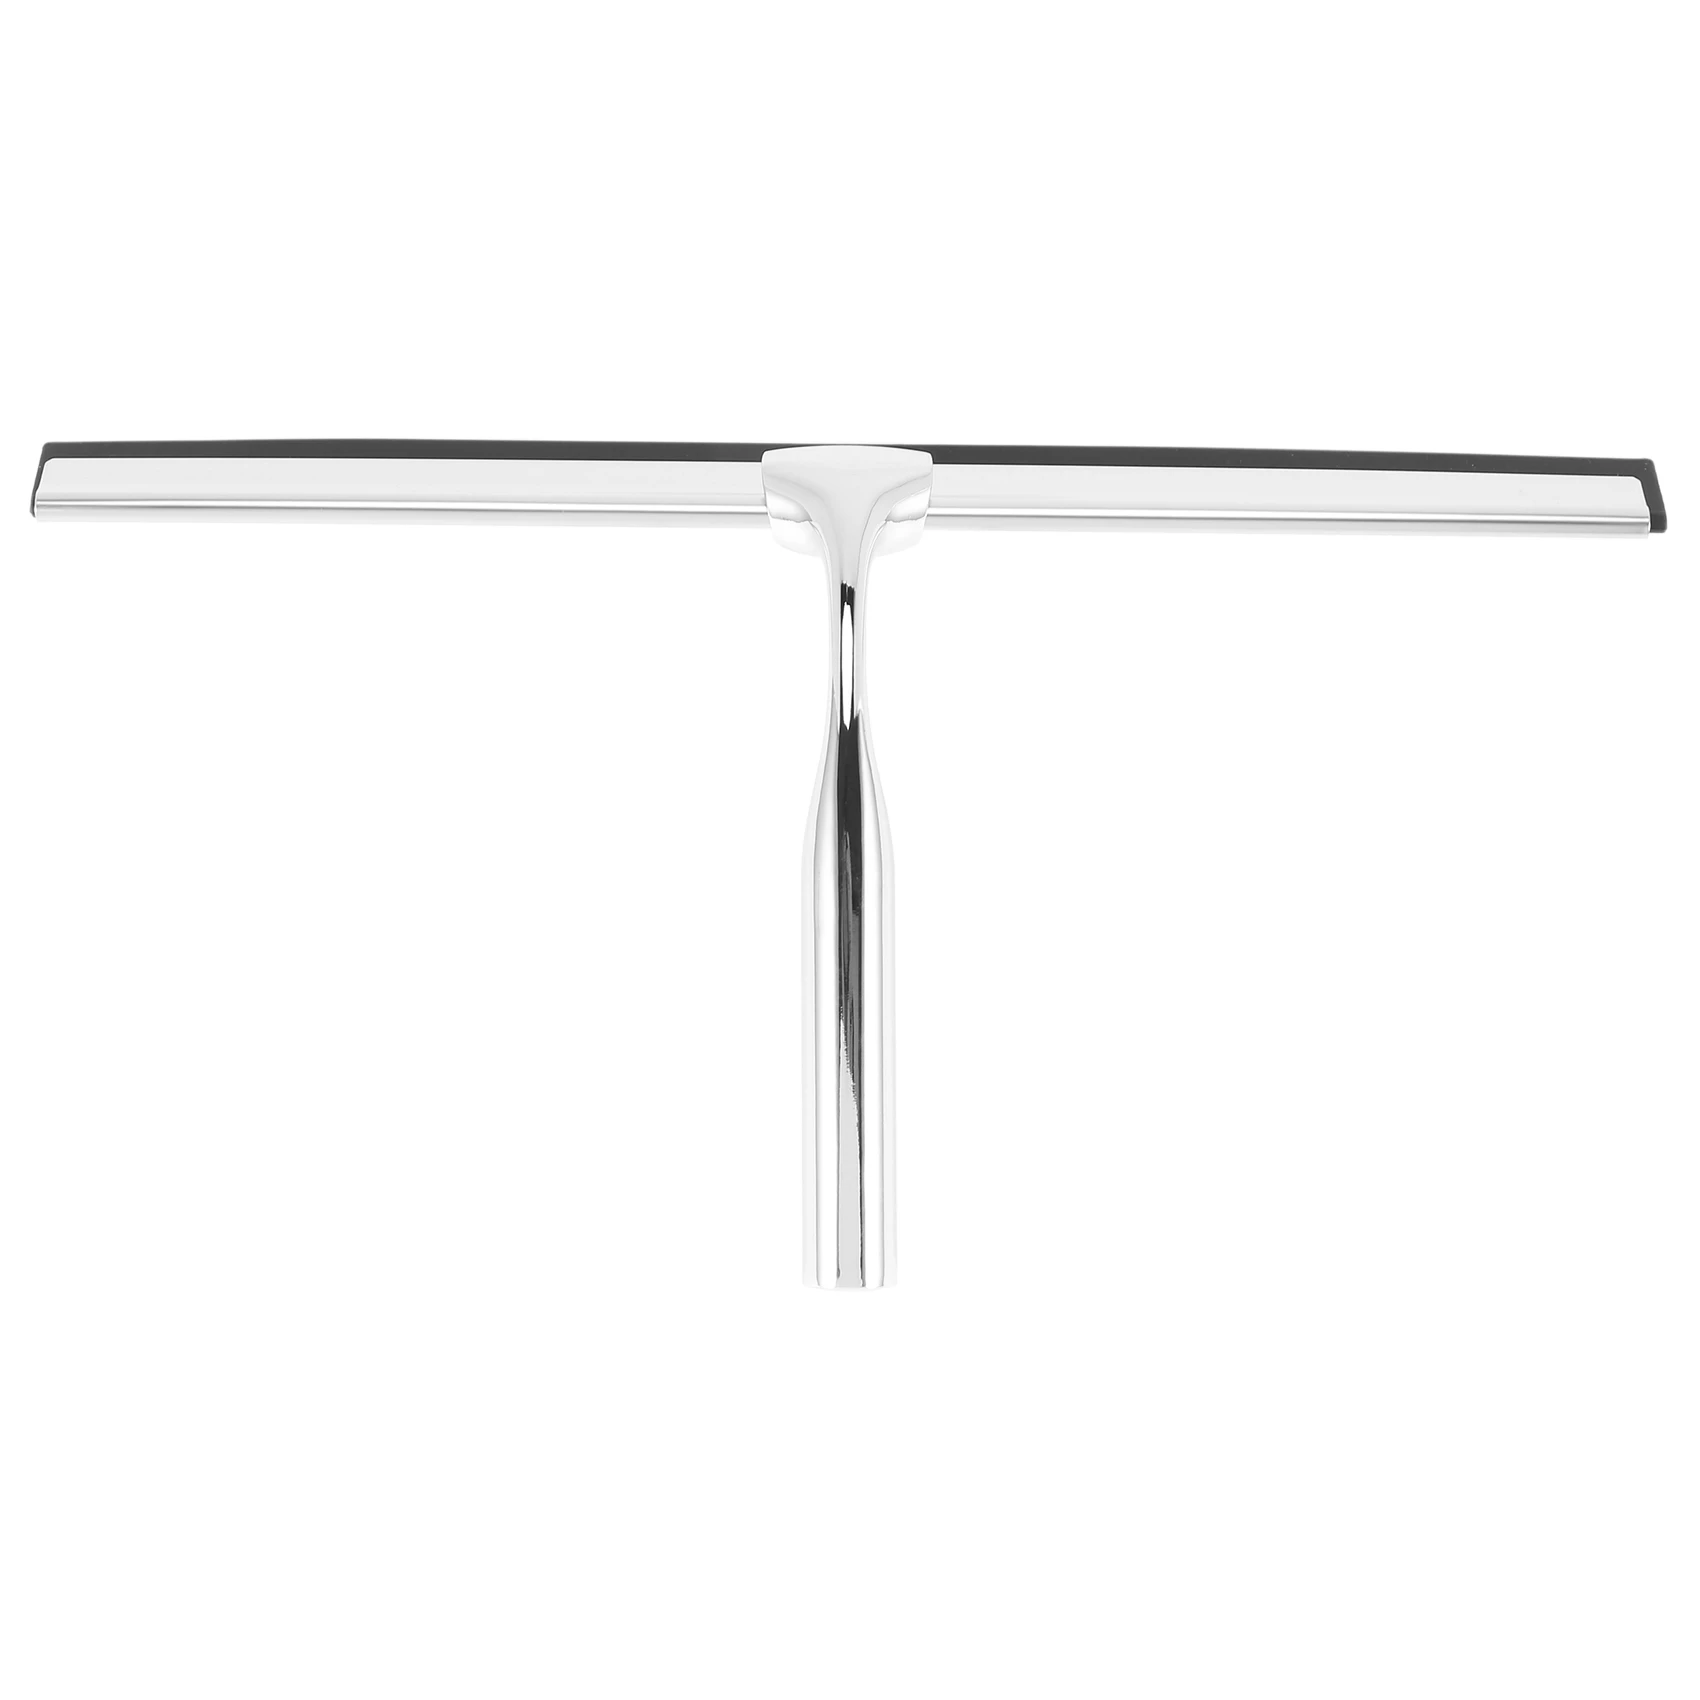 

Squeegee Stainless Steel Shower Wiper 31cm Shower Squeegee Without Drilling Window Puller with Wall Hanger 2 Silicone